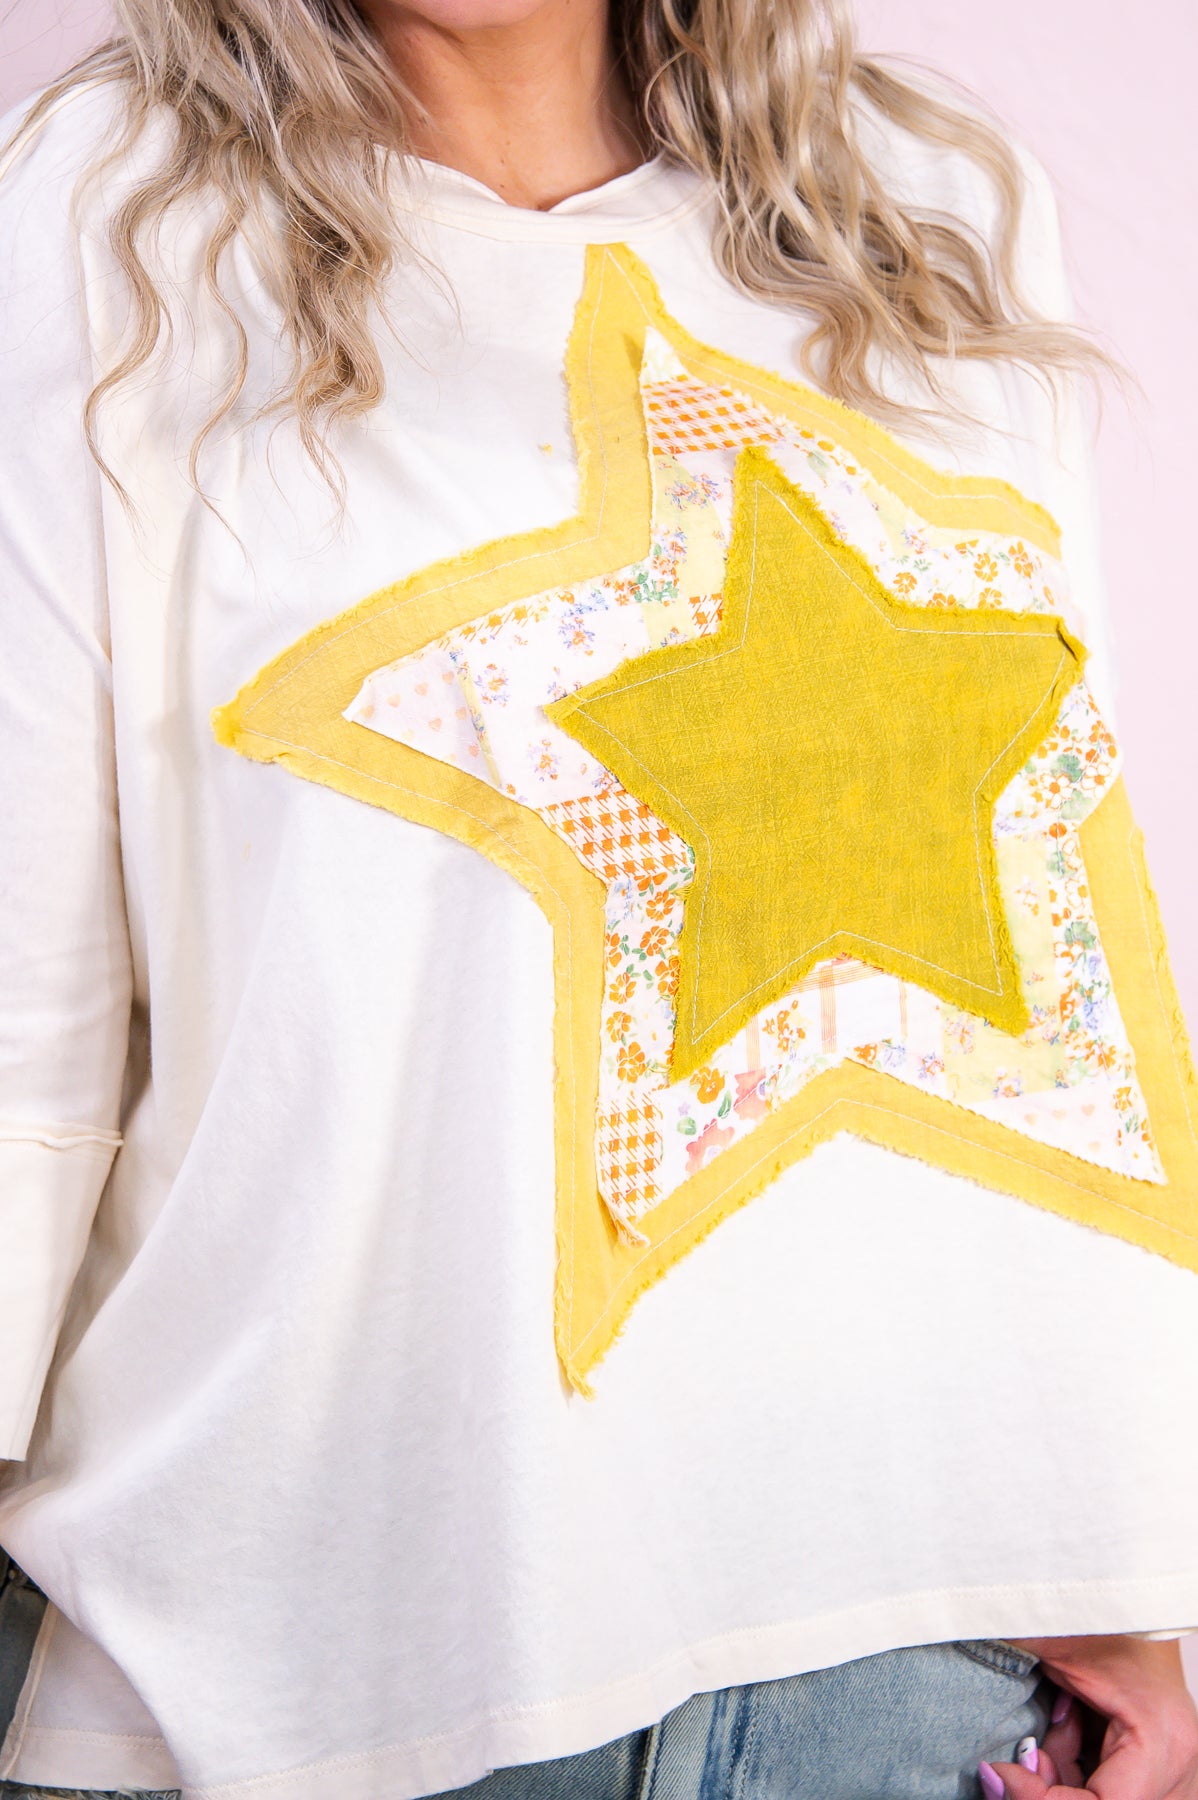 Ready To Shine Cream/Multi Color Floral/Star Patchwork Top - T9263CR